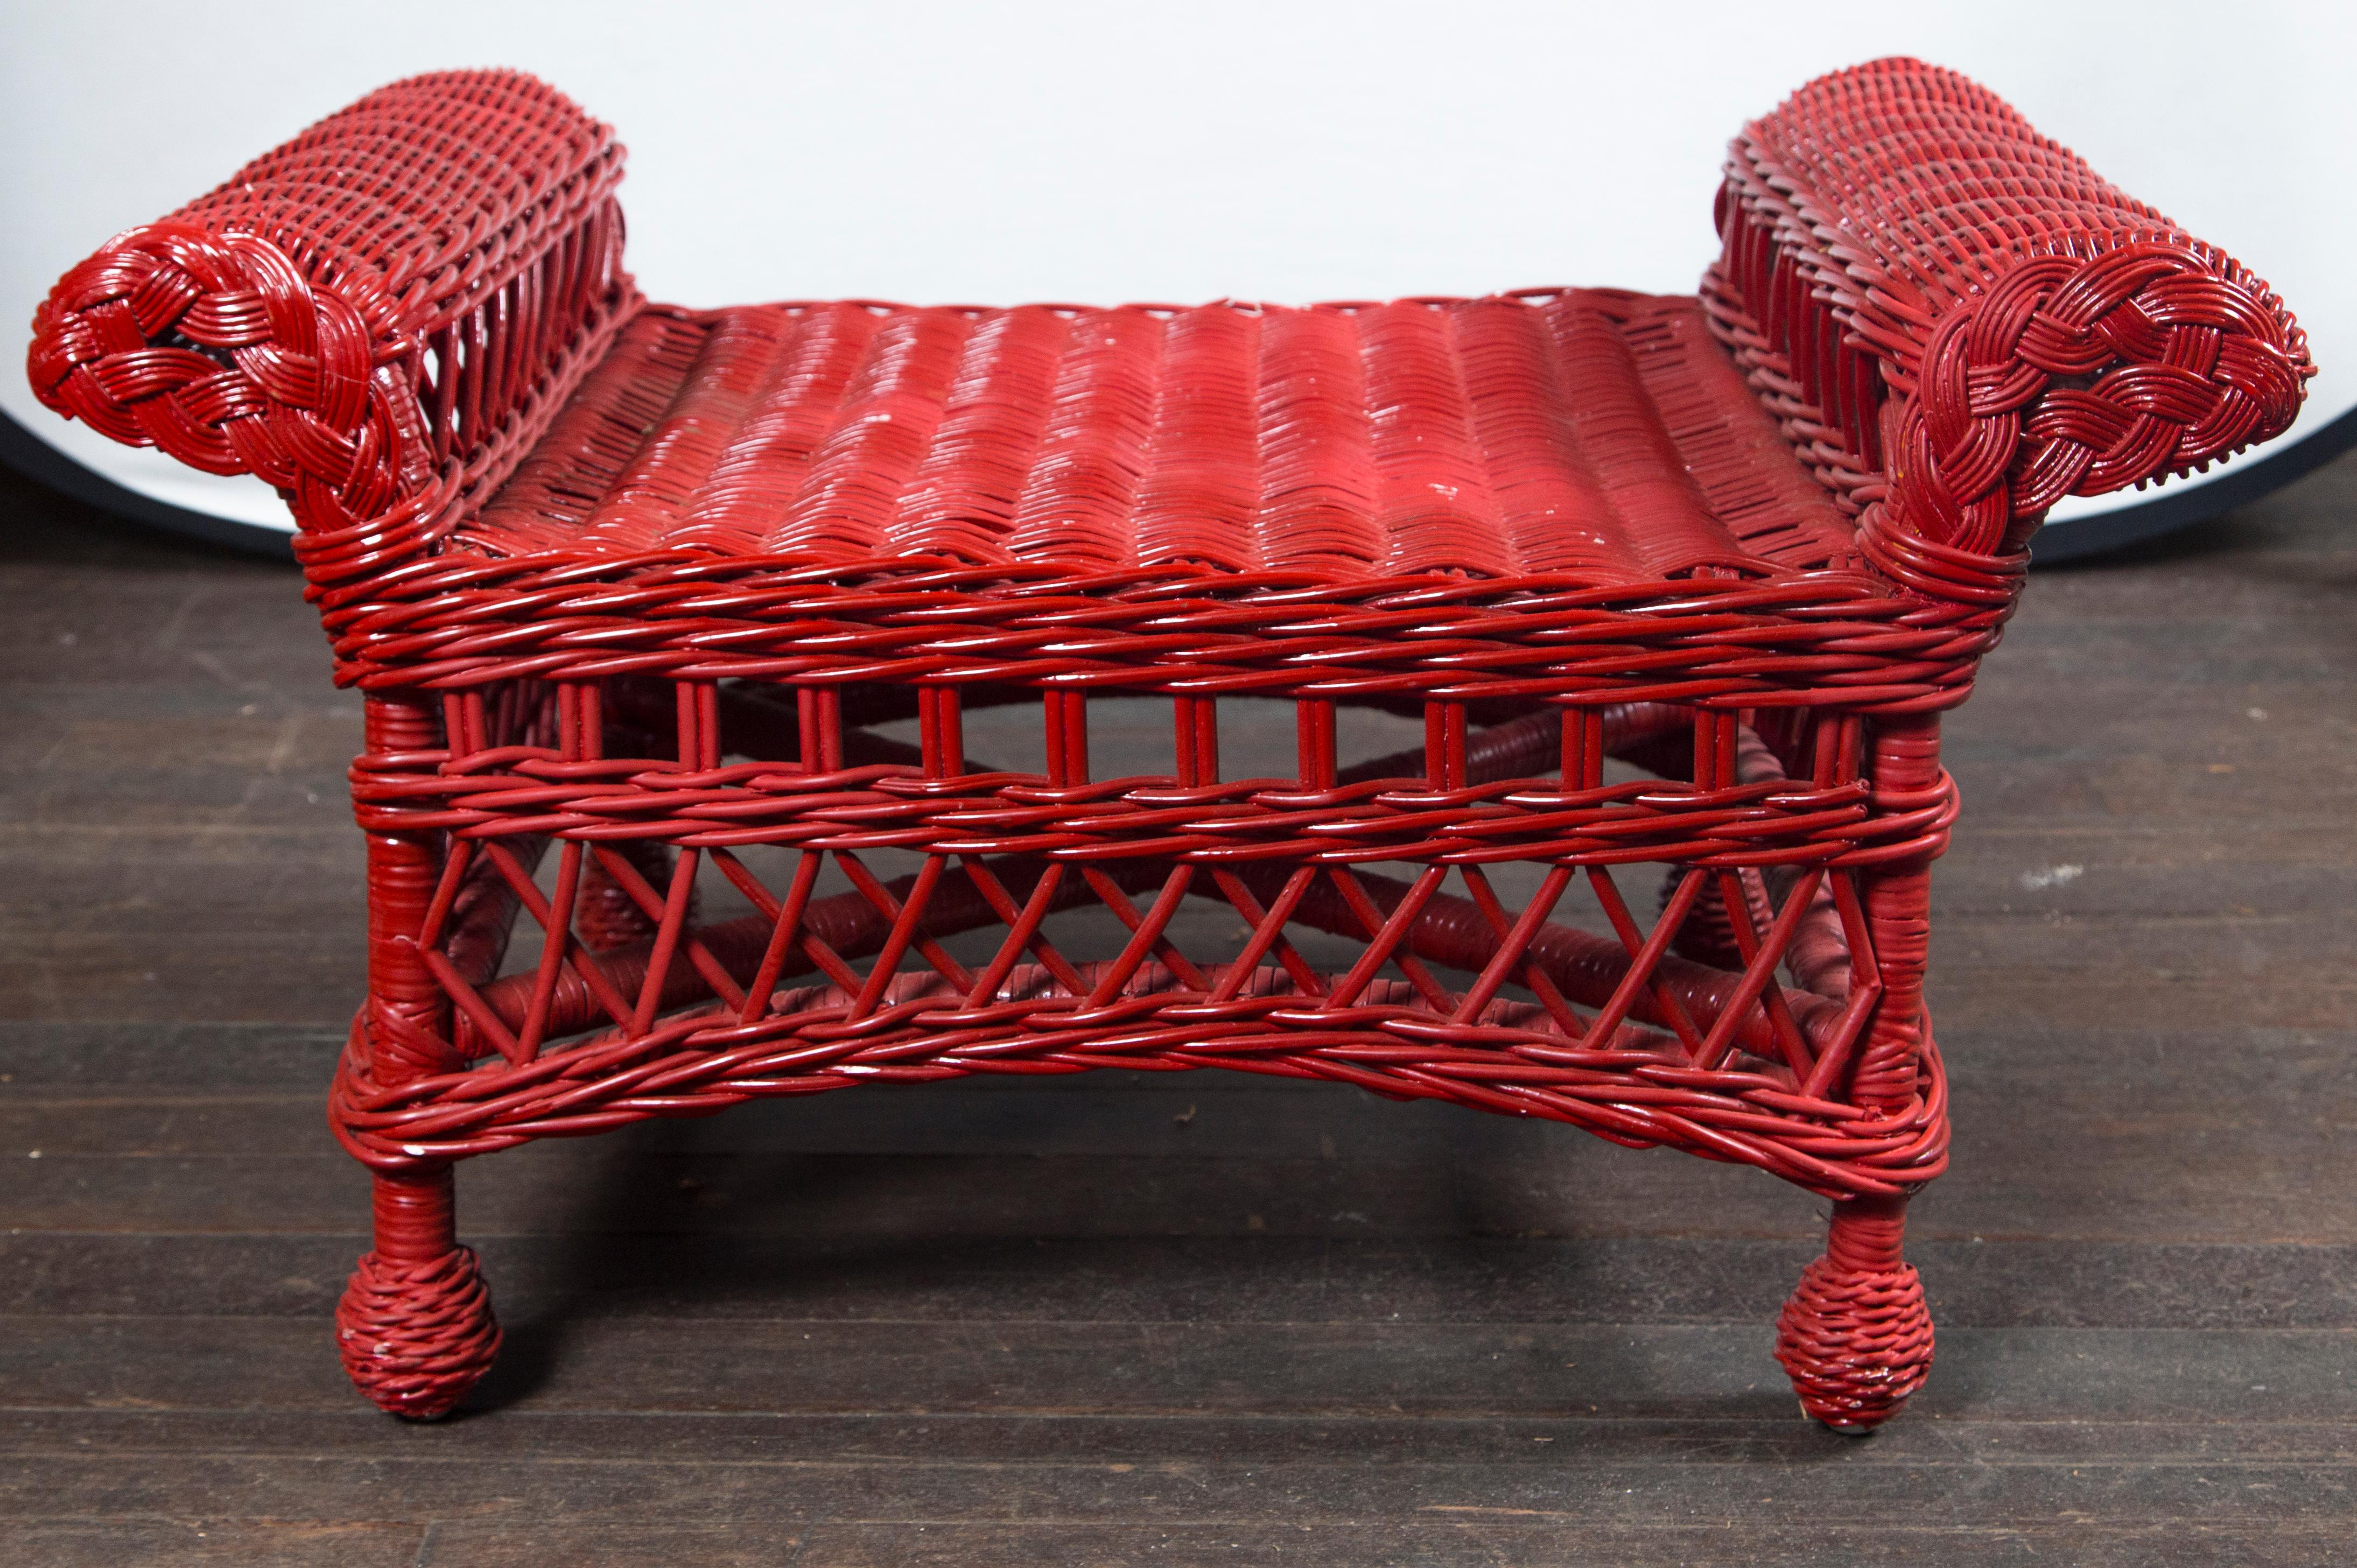 Sturdy, well-made, vintage wicker bench painted red.